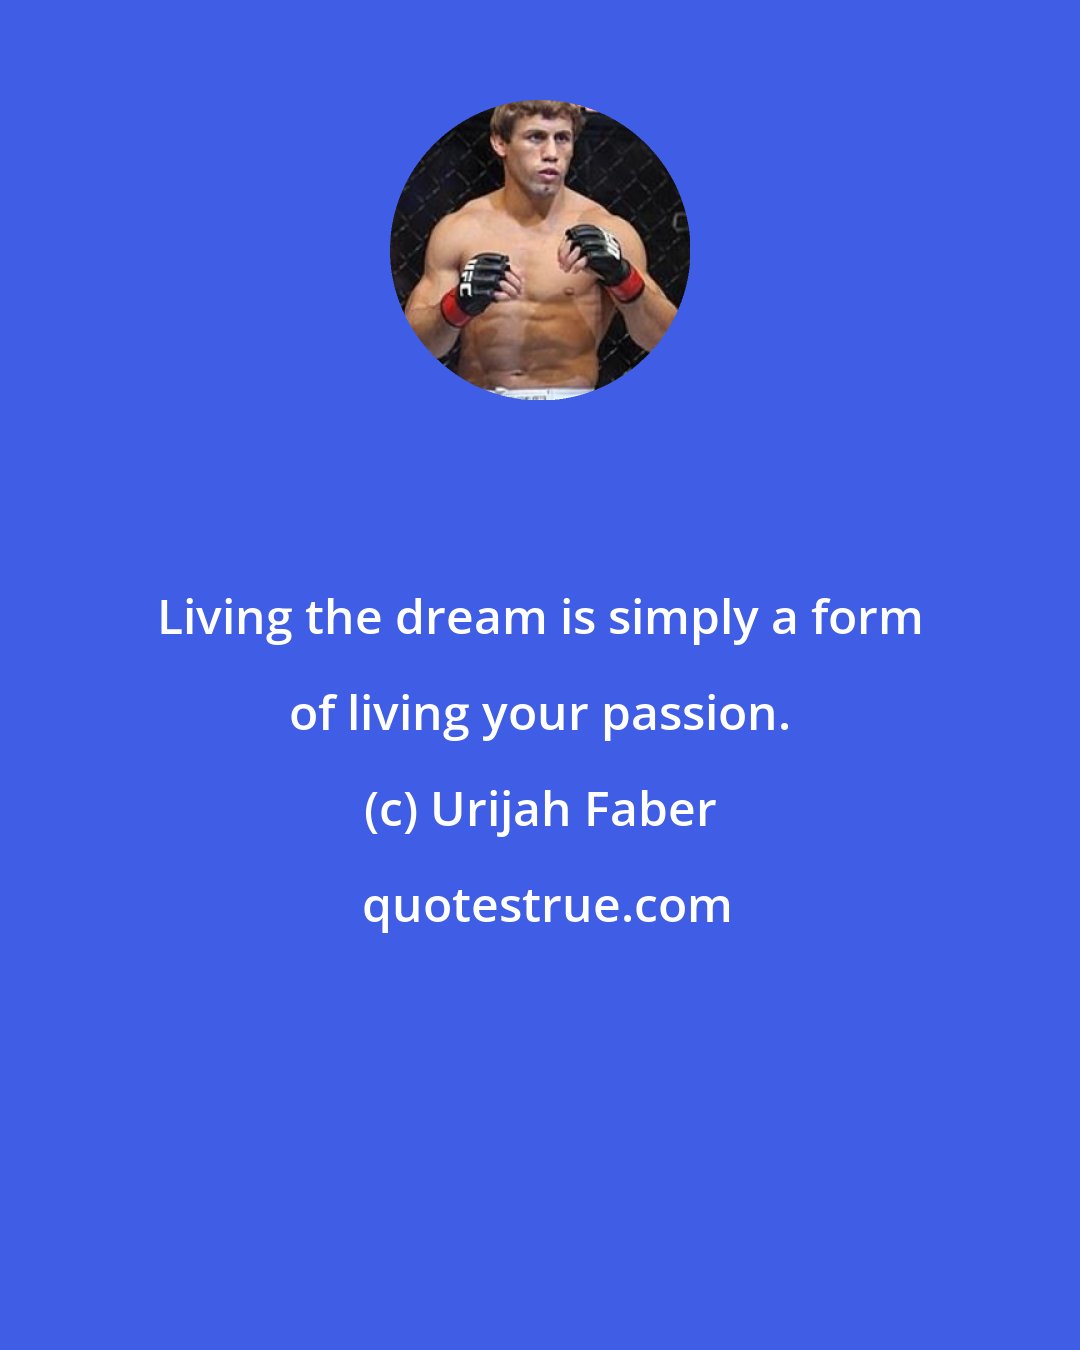 Urijah Faber: Living the dream is simply a form of living your passion.